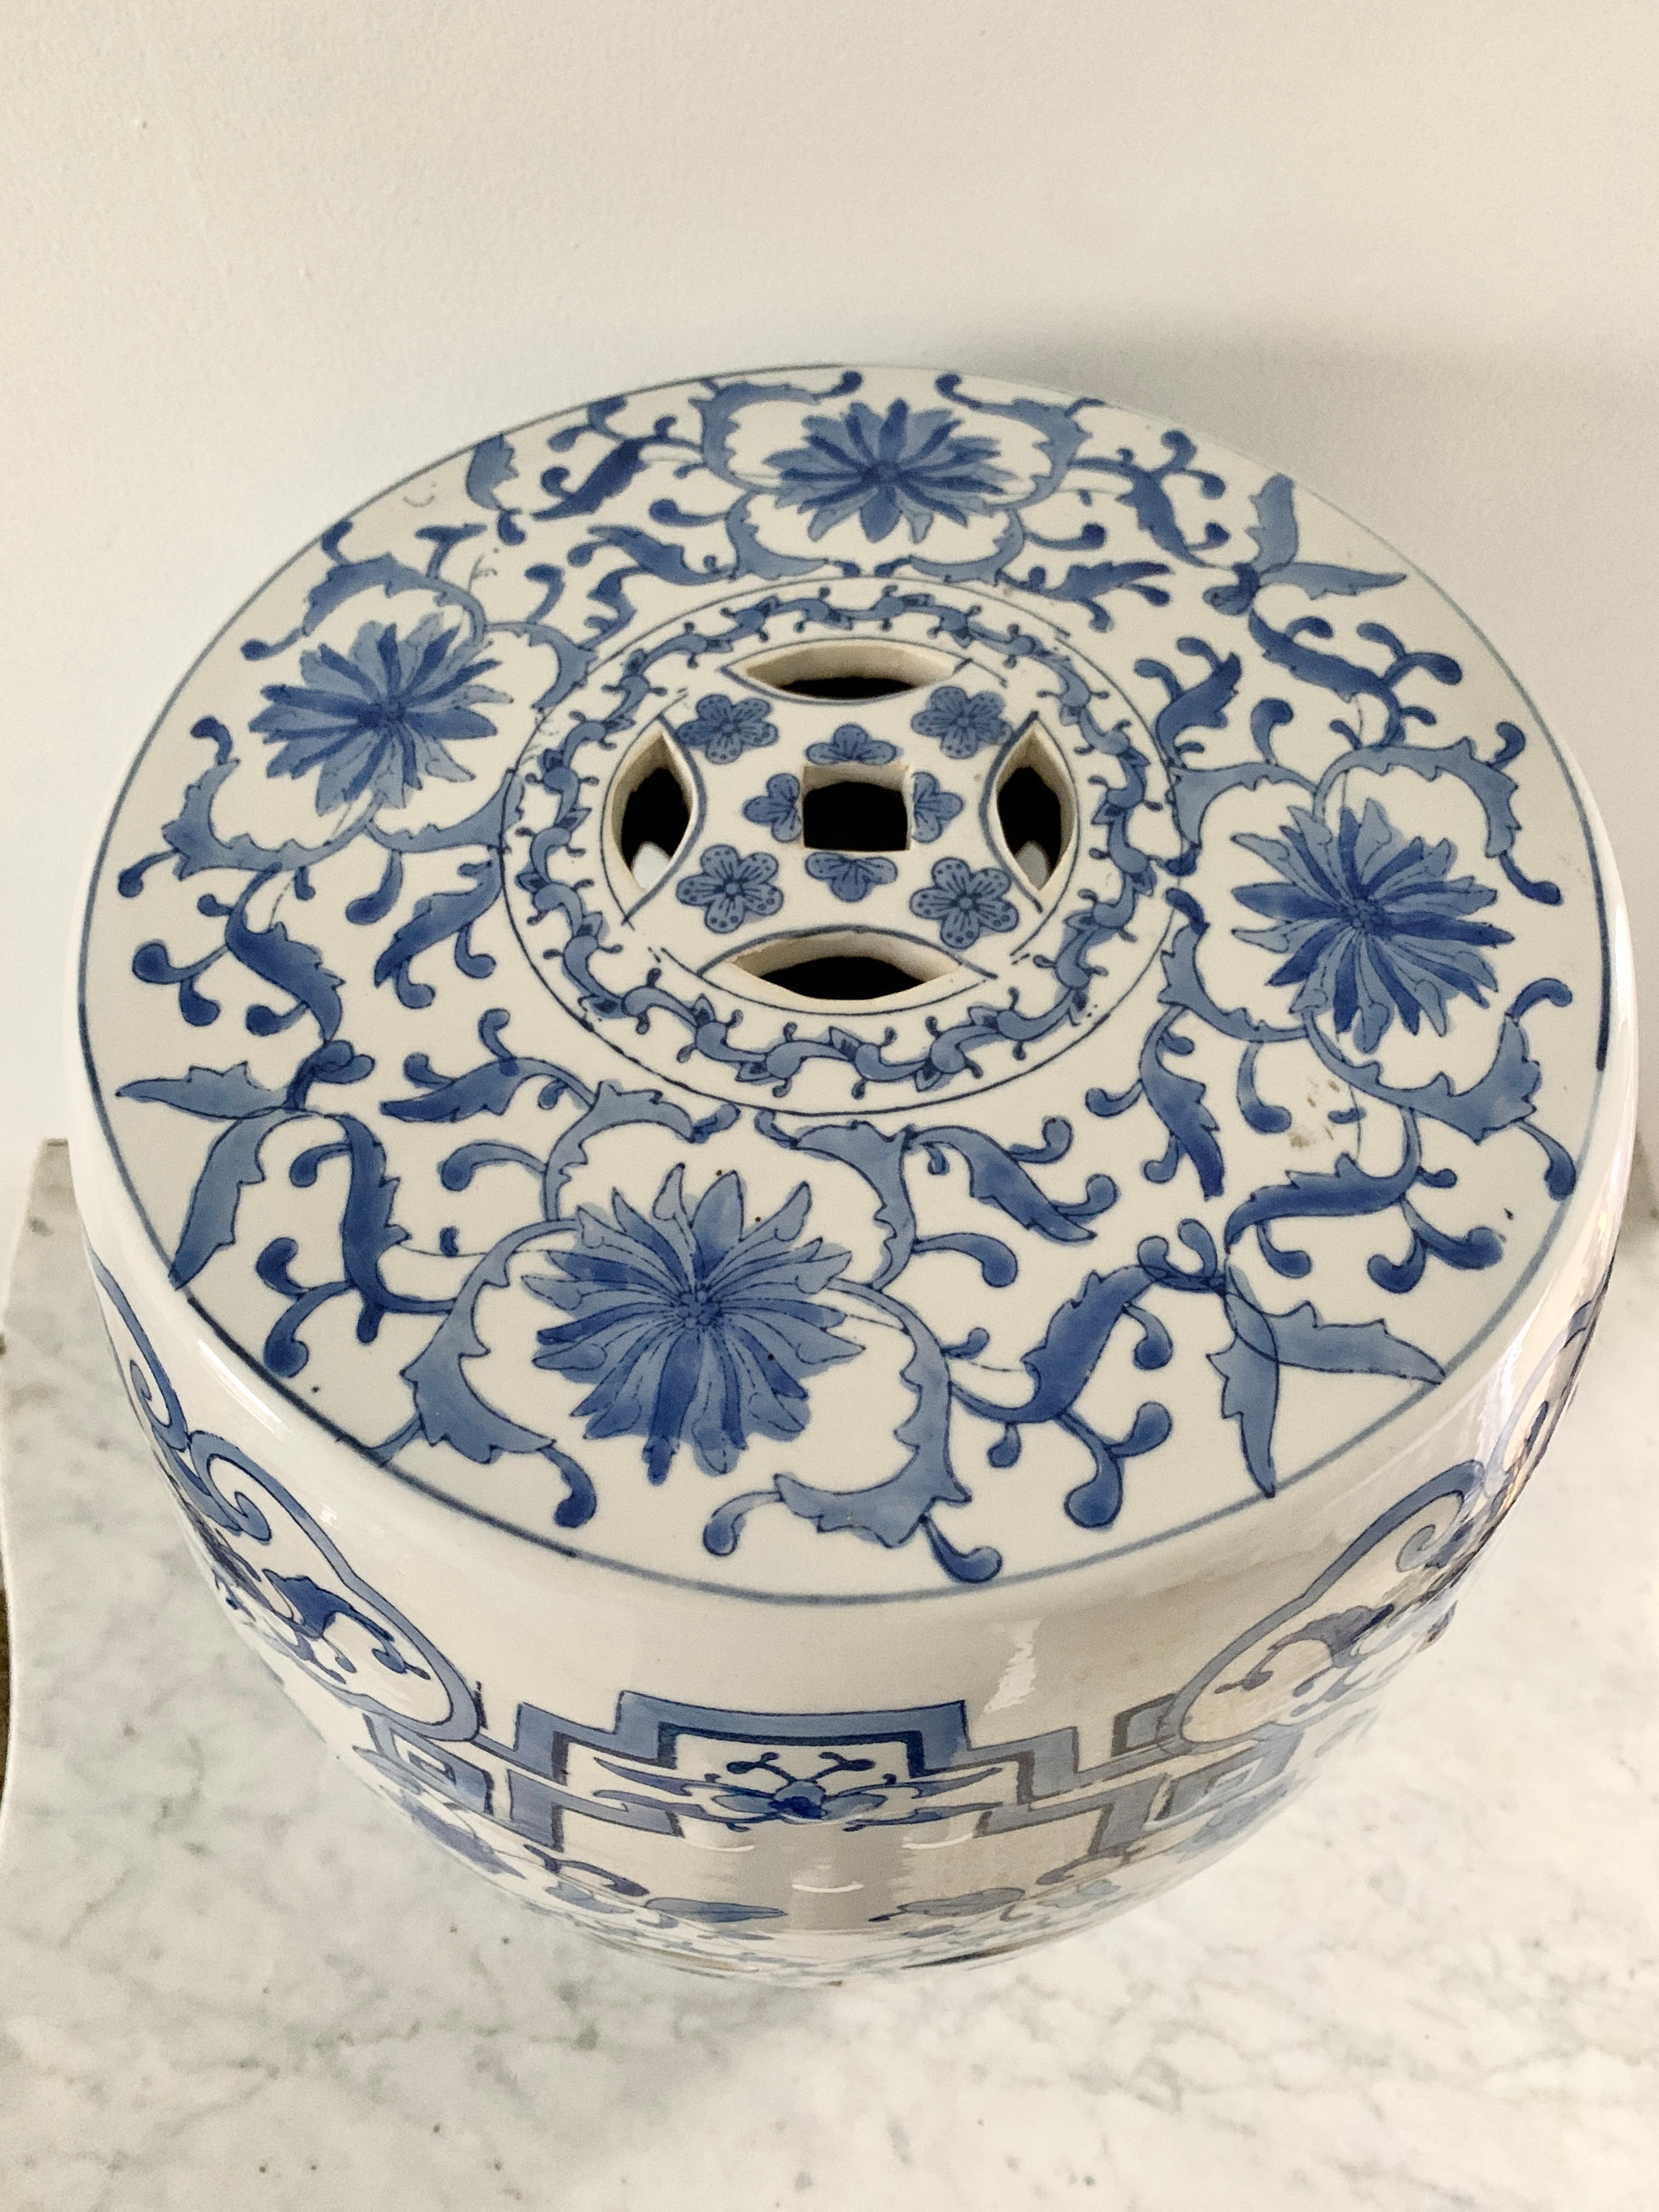 A gorgeous Chinoiserie blue and white porcelain garden stool, plant stand, or small side table featuring depictions of a dragon, a bird, and Greek Key borders. 

Late 20th century

Measures: 13